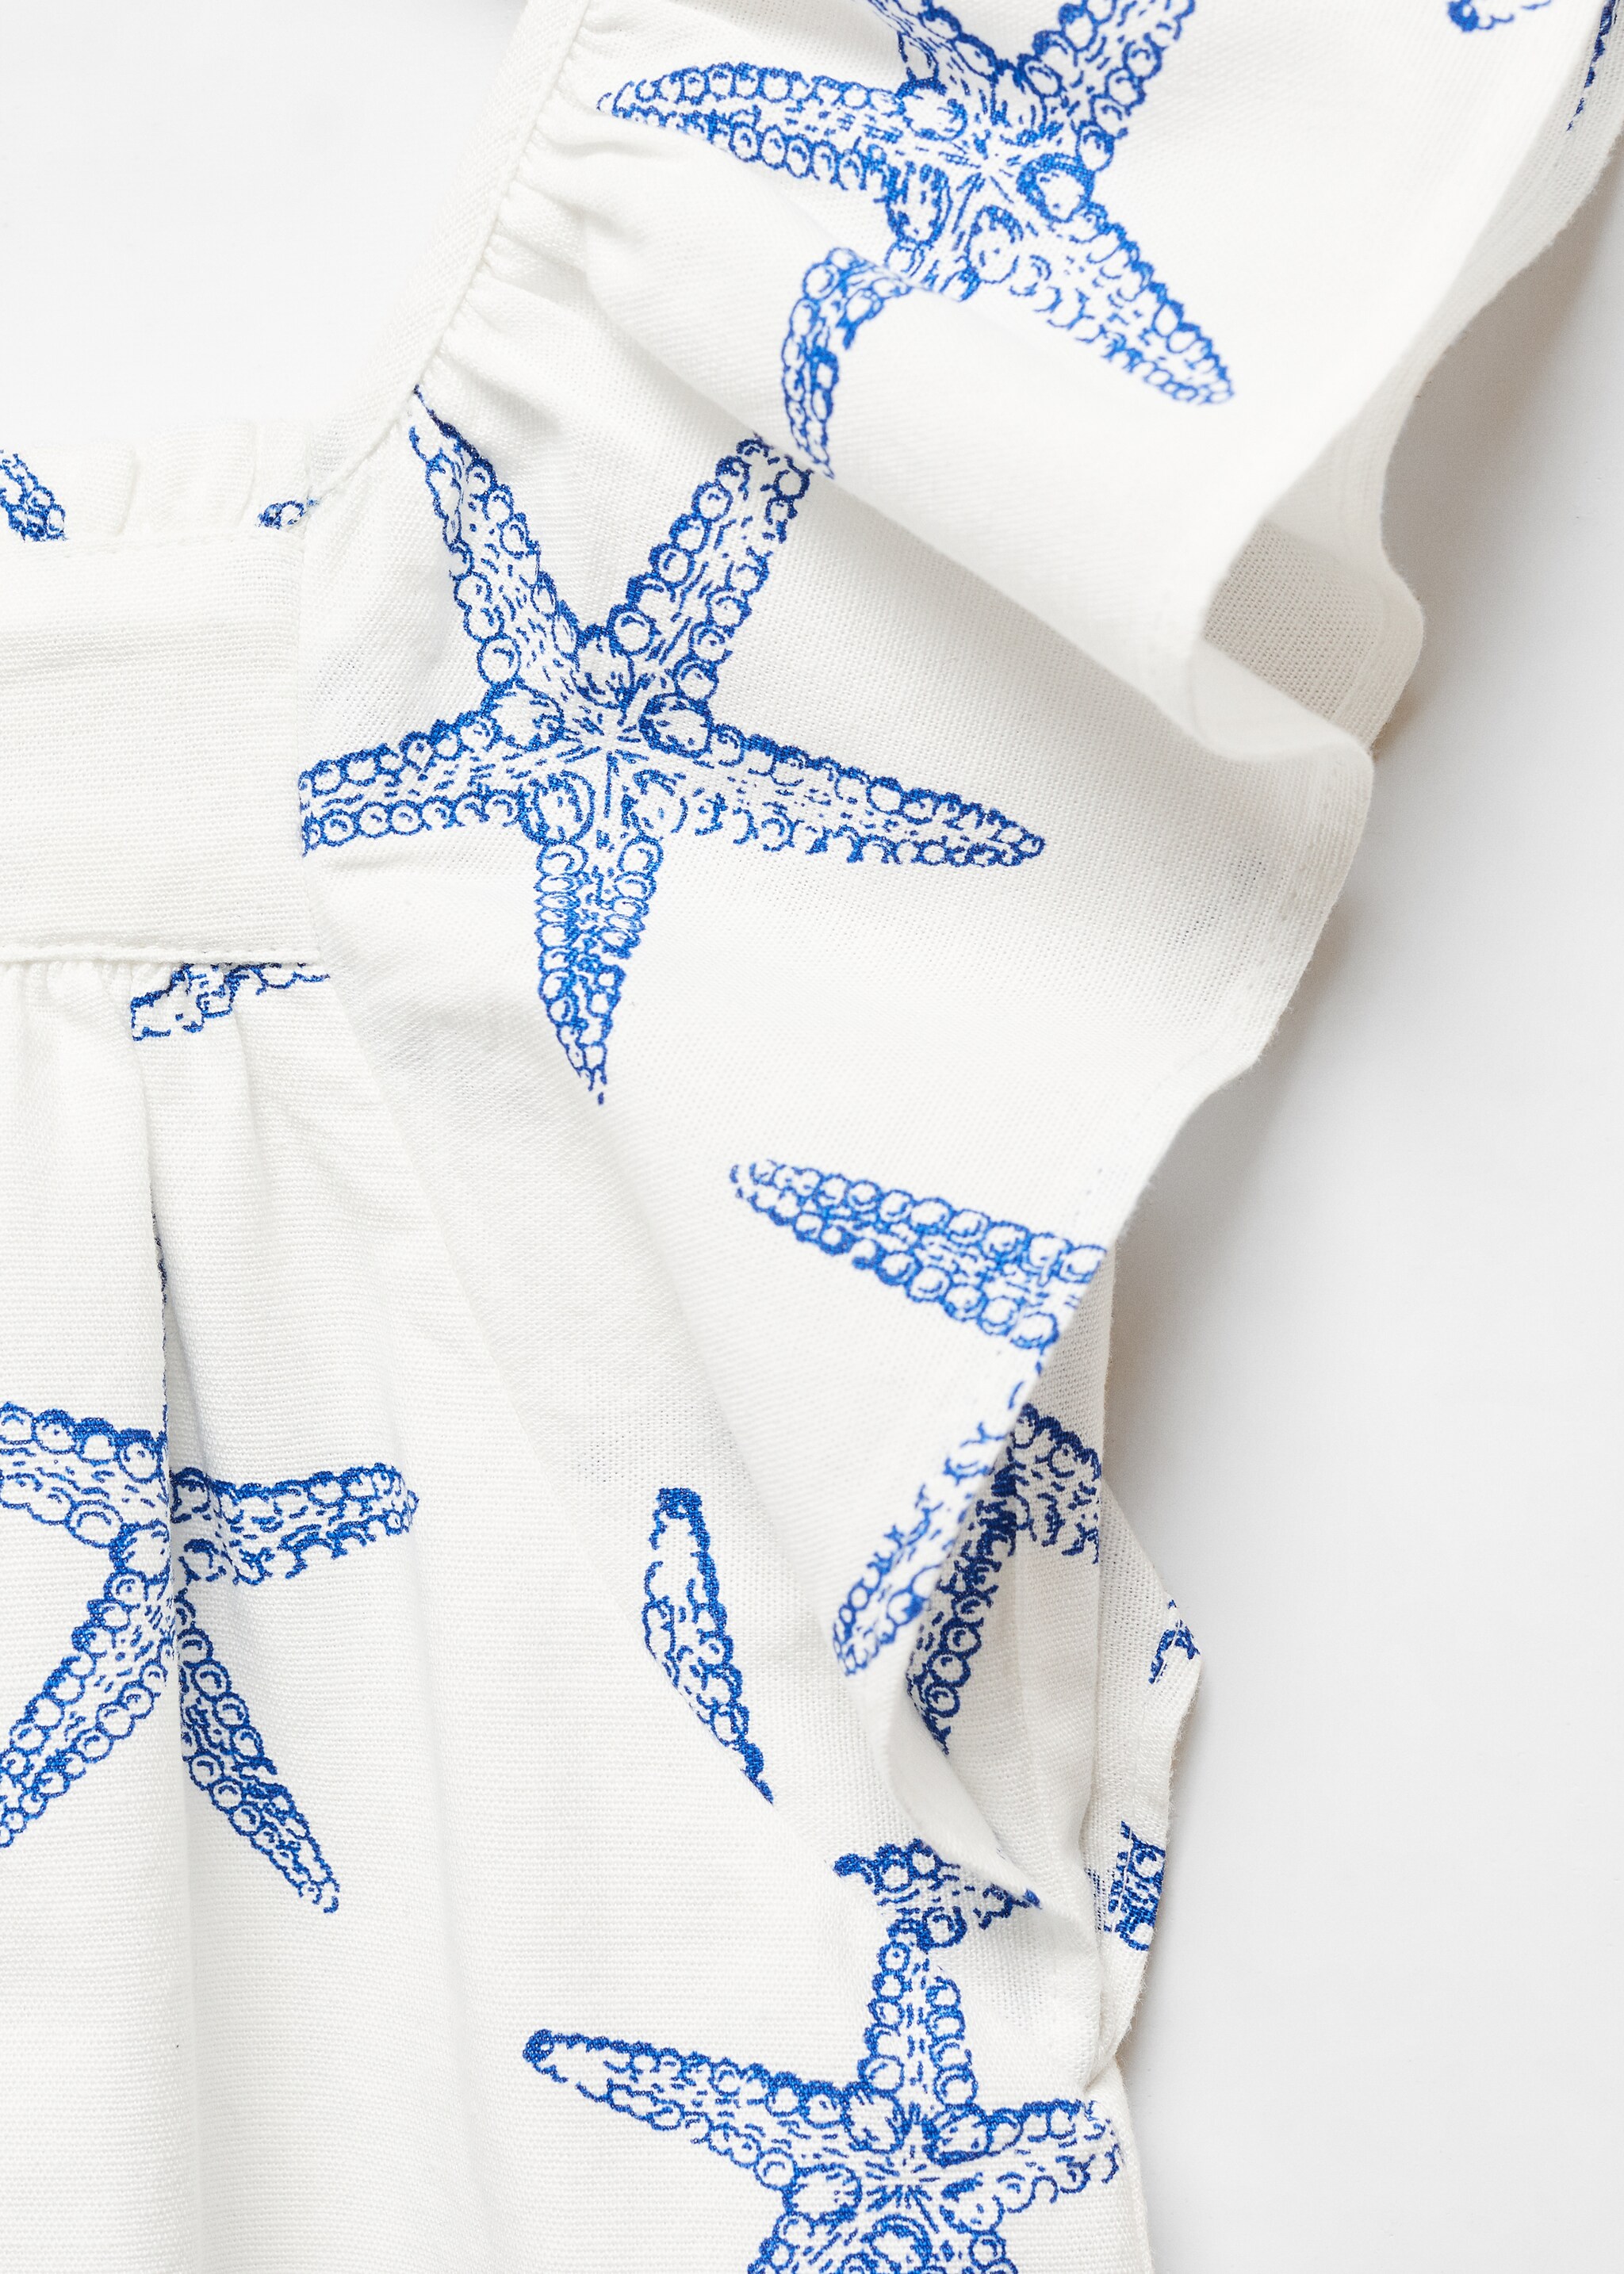 Star print dress - Details of the article 8